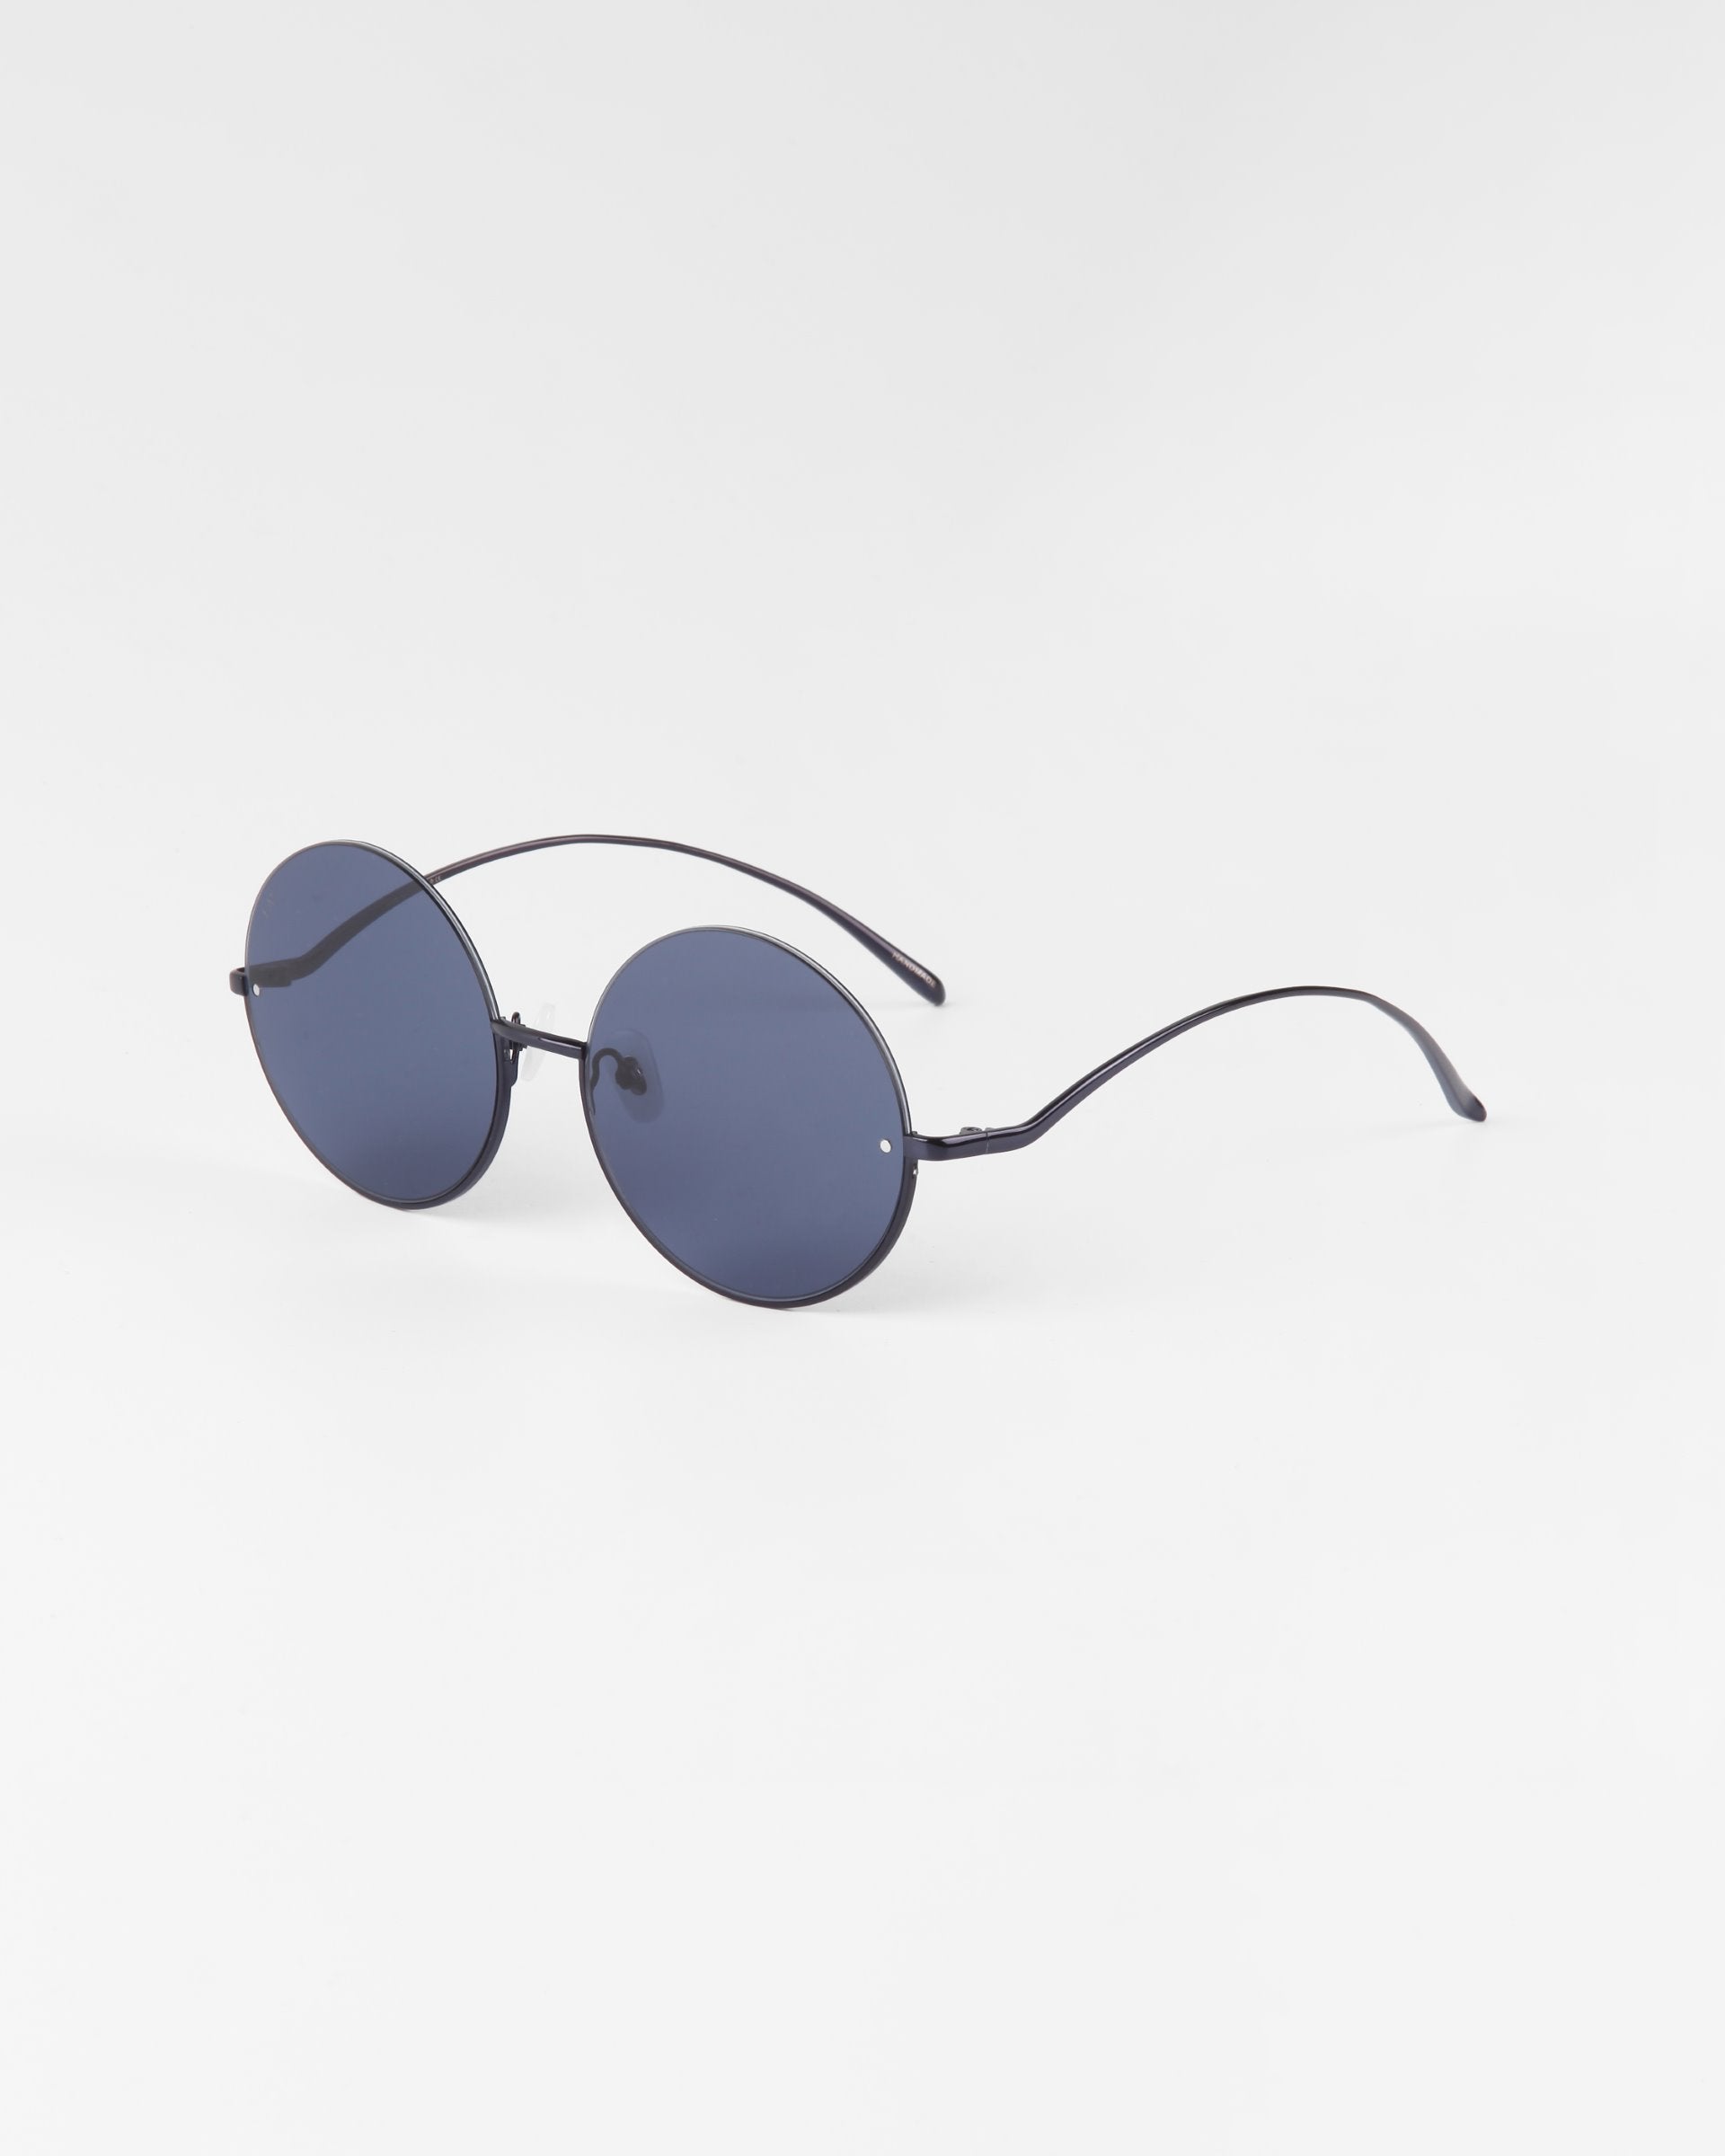 A pair of Oceana sunglasses by For Art&#39;s Sake® with thin stainless steel frames and arms is shown on a plain white background. The sunglasses have a minimalist design, appear lightweight, and feature nylon lenses that are 100% UVA &amp; UVB-protected.